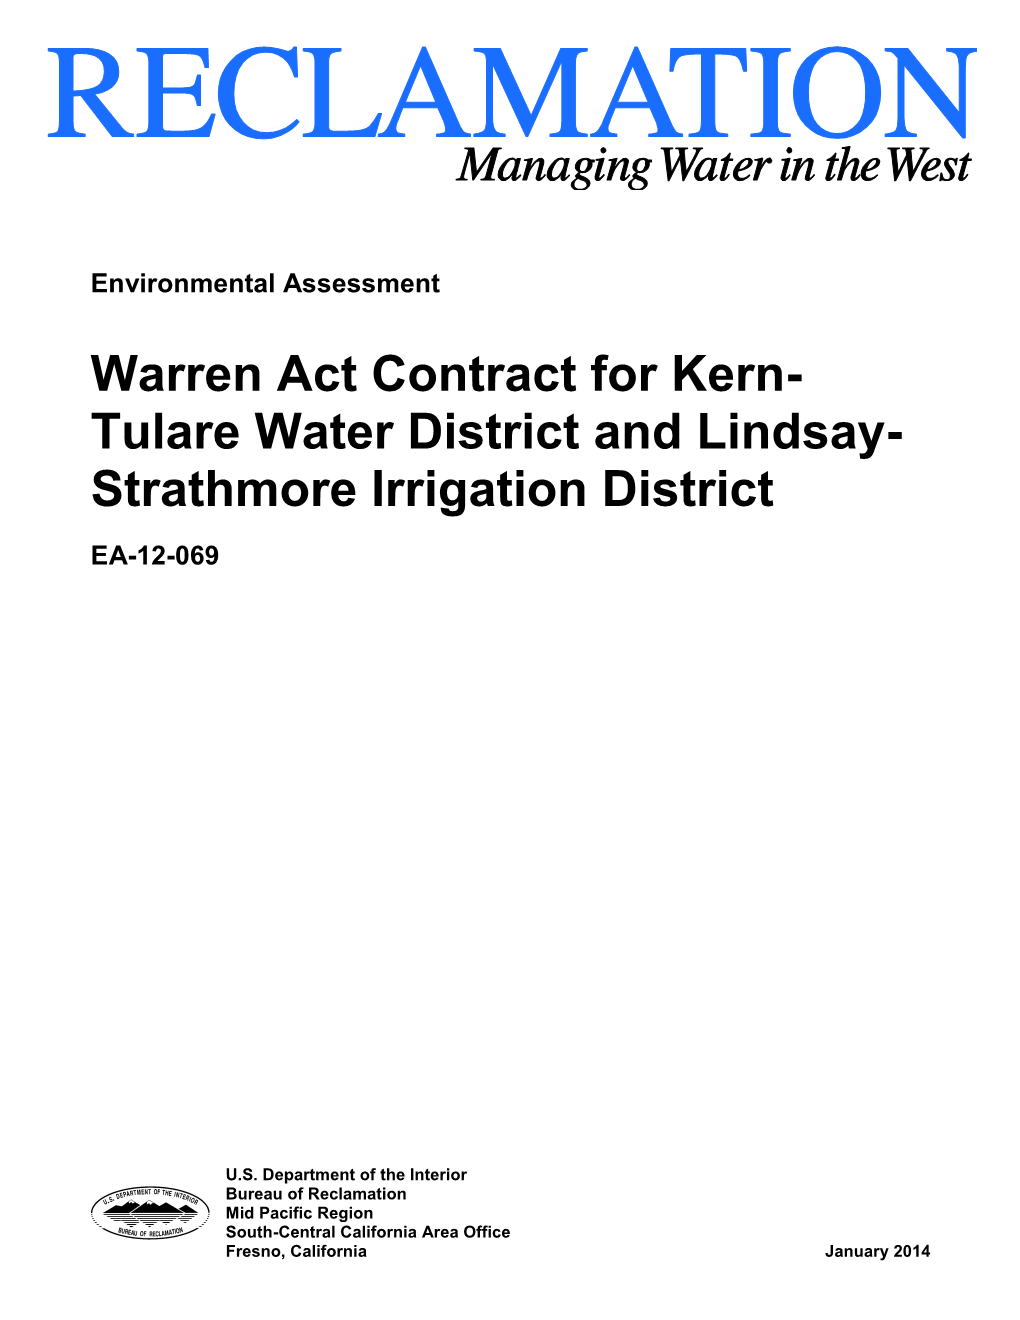 Warren Act Contract for Kern- Tulare Water District and Lindsay- Strathmore Irrigation District